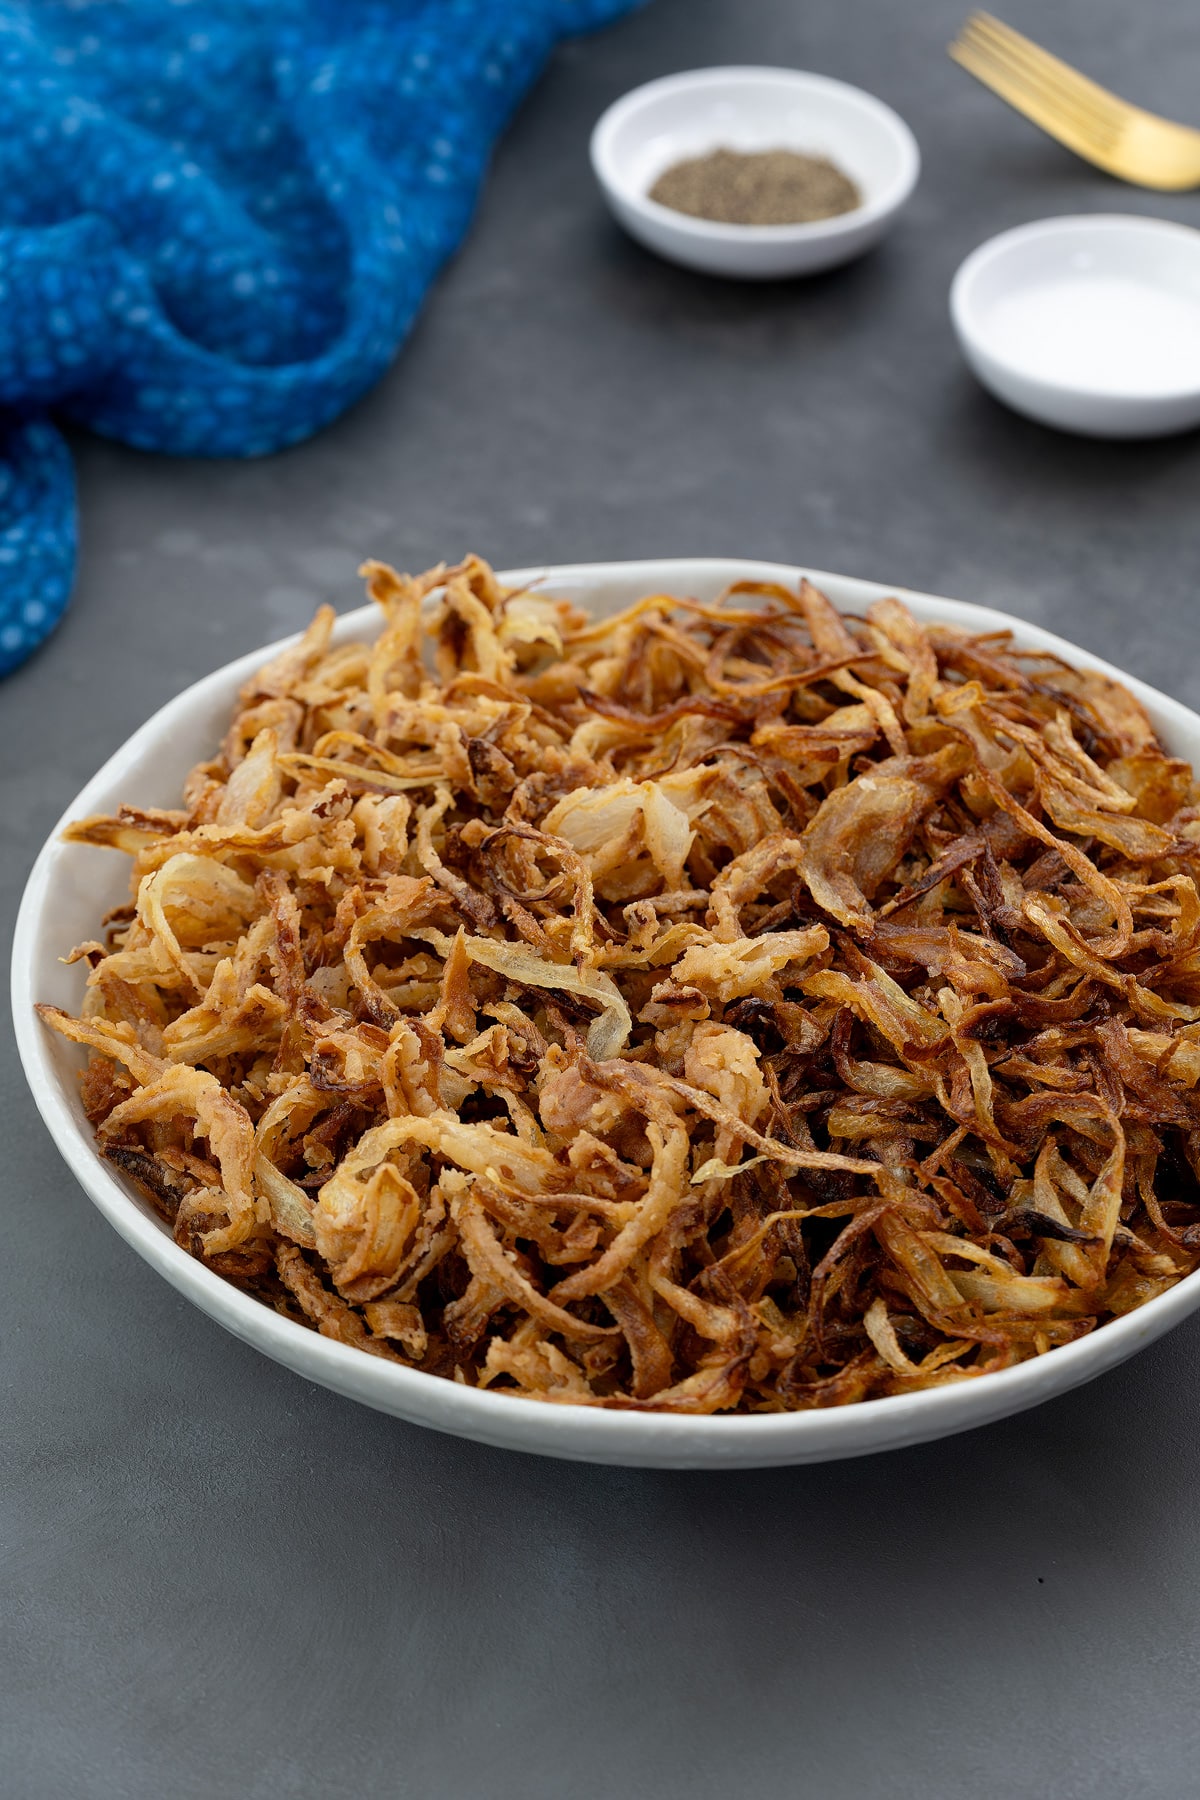 Classic and French fried onions in a white bowl placed on a gray table. A blue towel, golden fork, and salt and pepper powder in small white plates placed around.